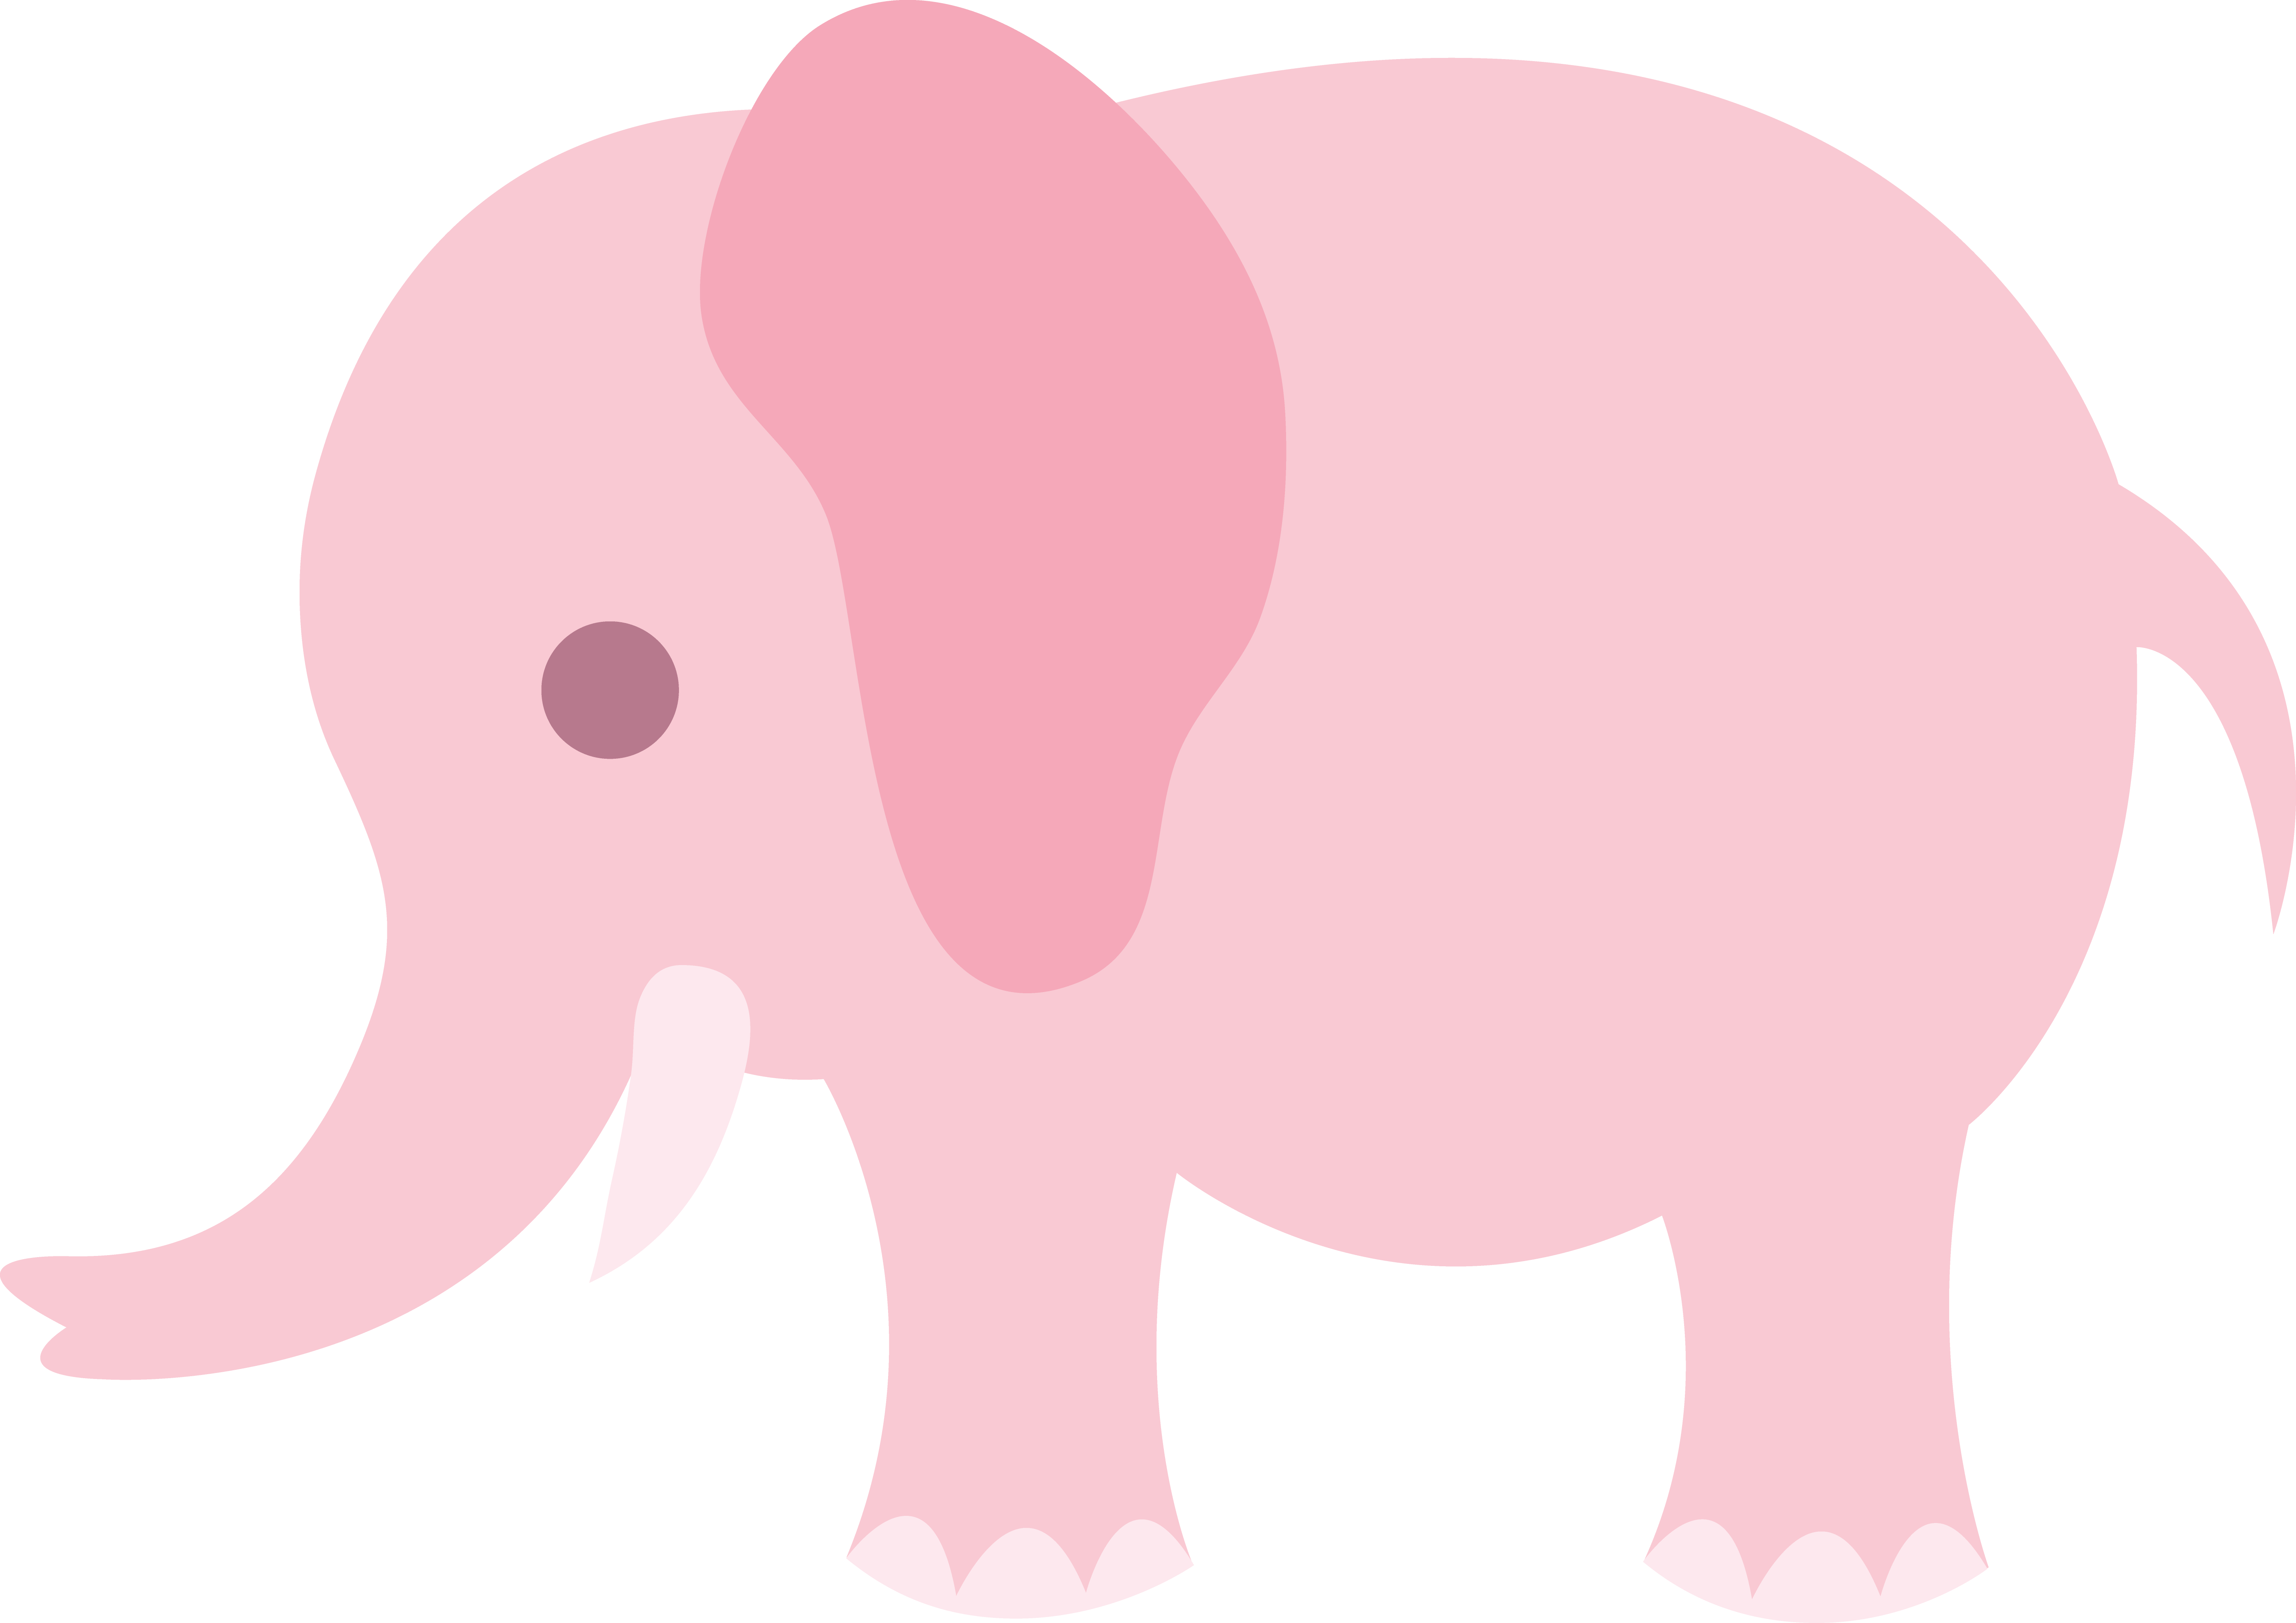 Pink Baby Elephant Cartoon Image Pictures Becuo